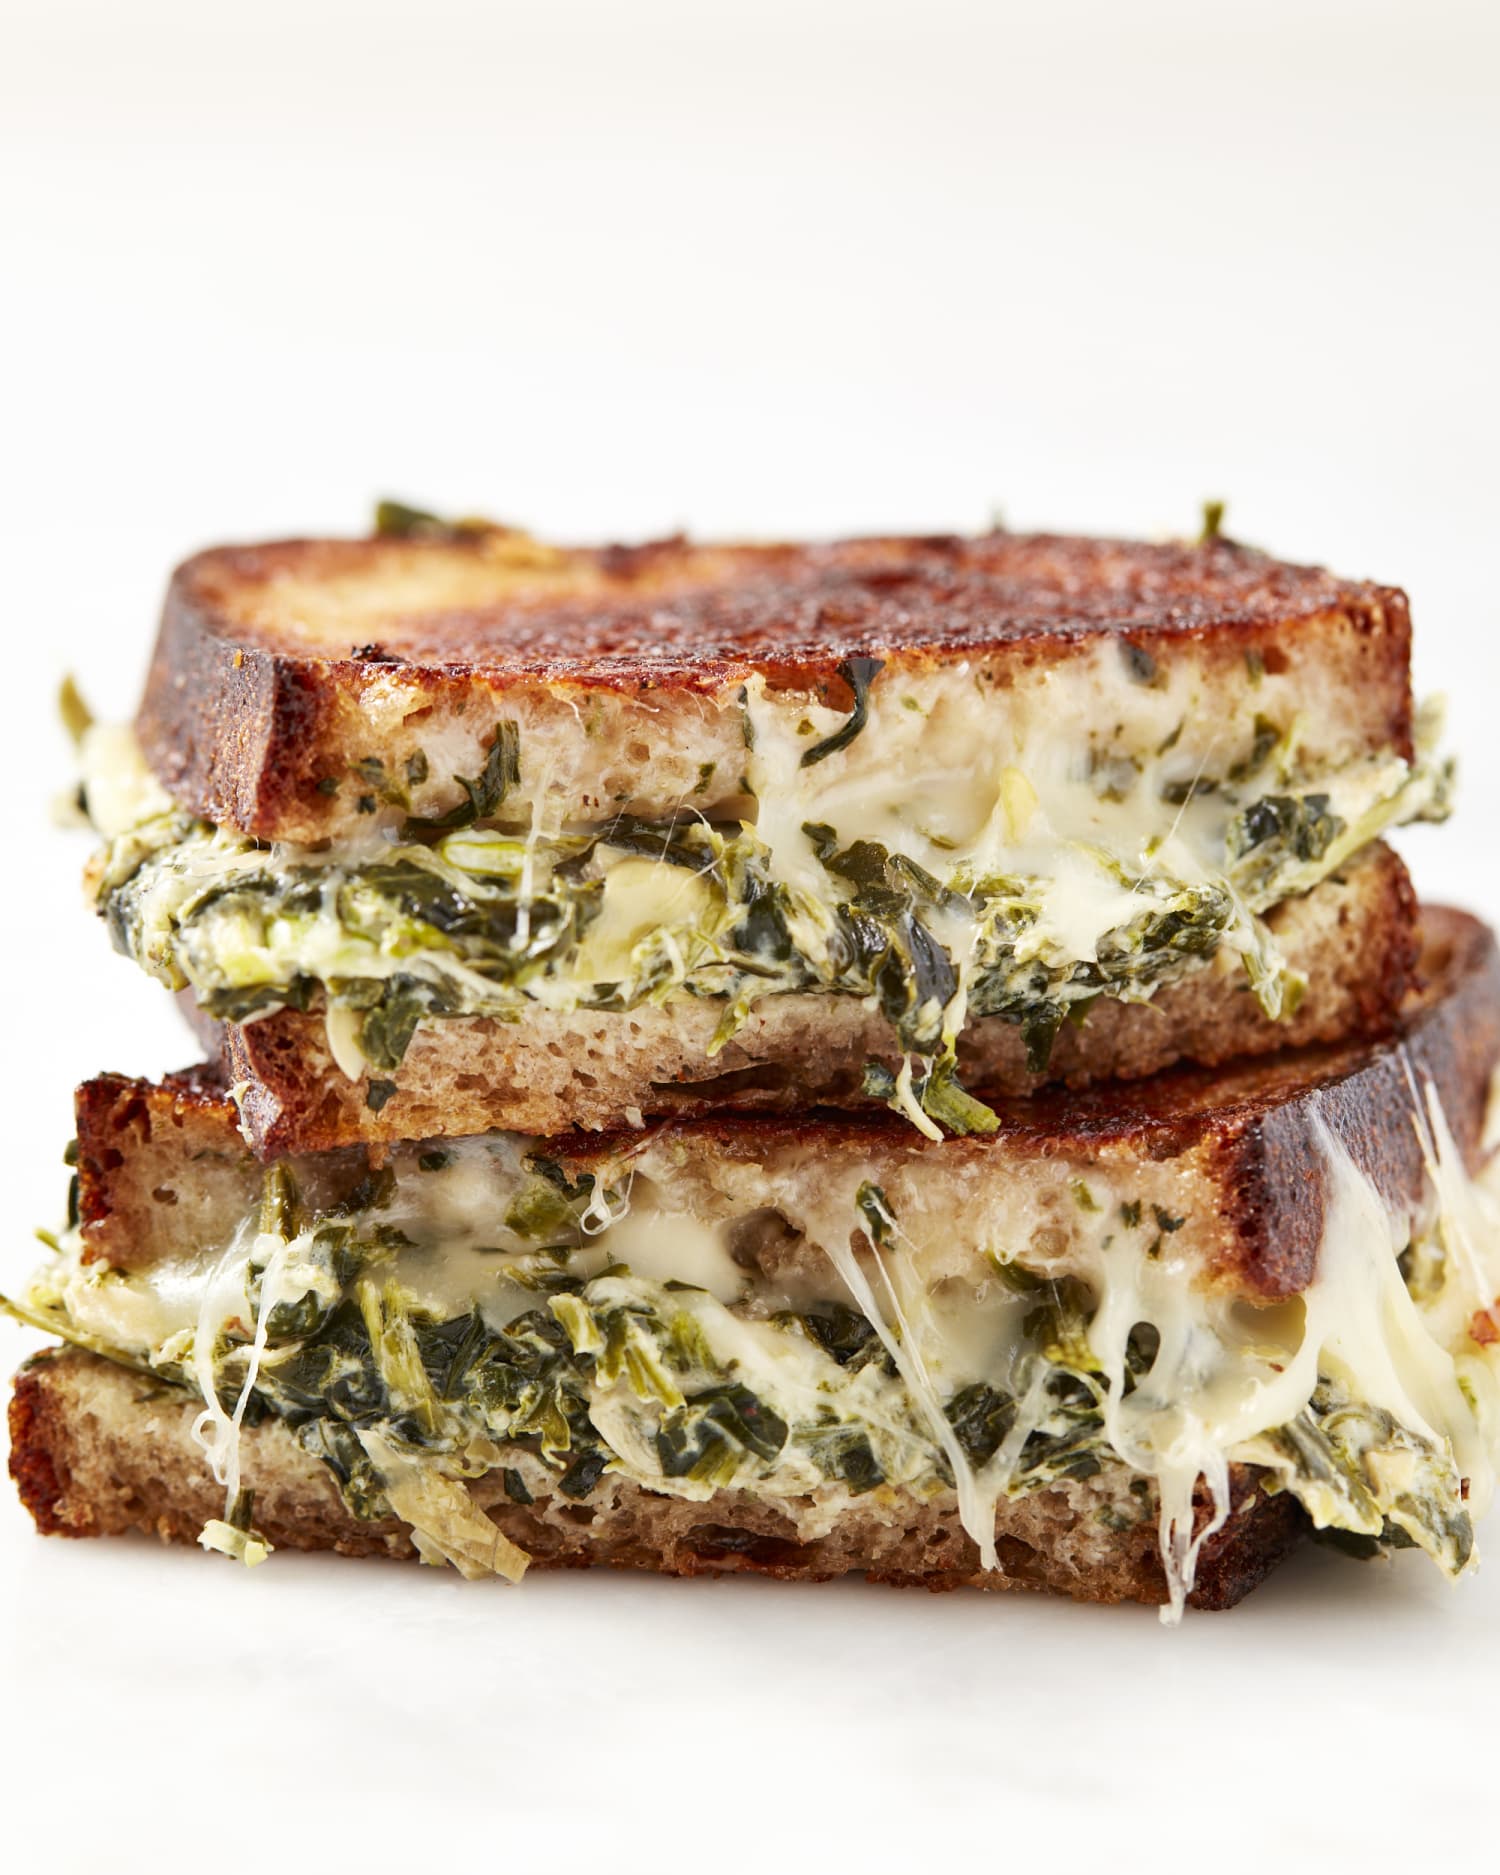 Spinach-Artichoke Grilled Cheese Is the Comfort Food Mash-Up You Need